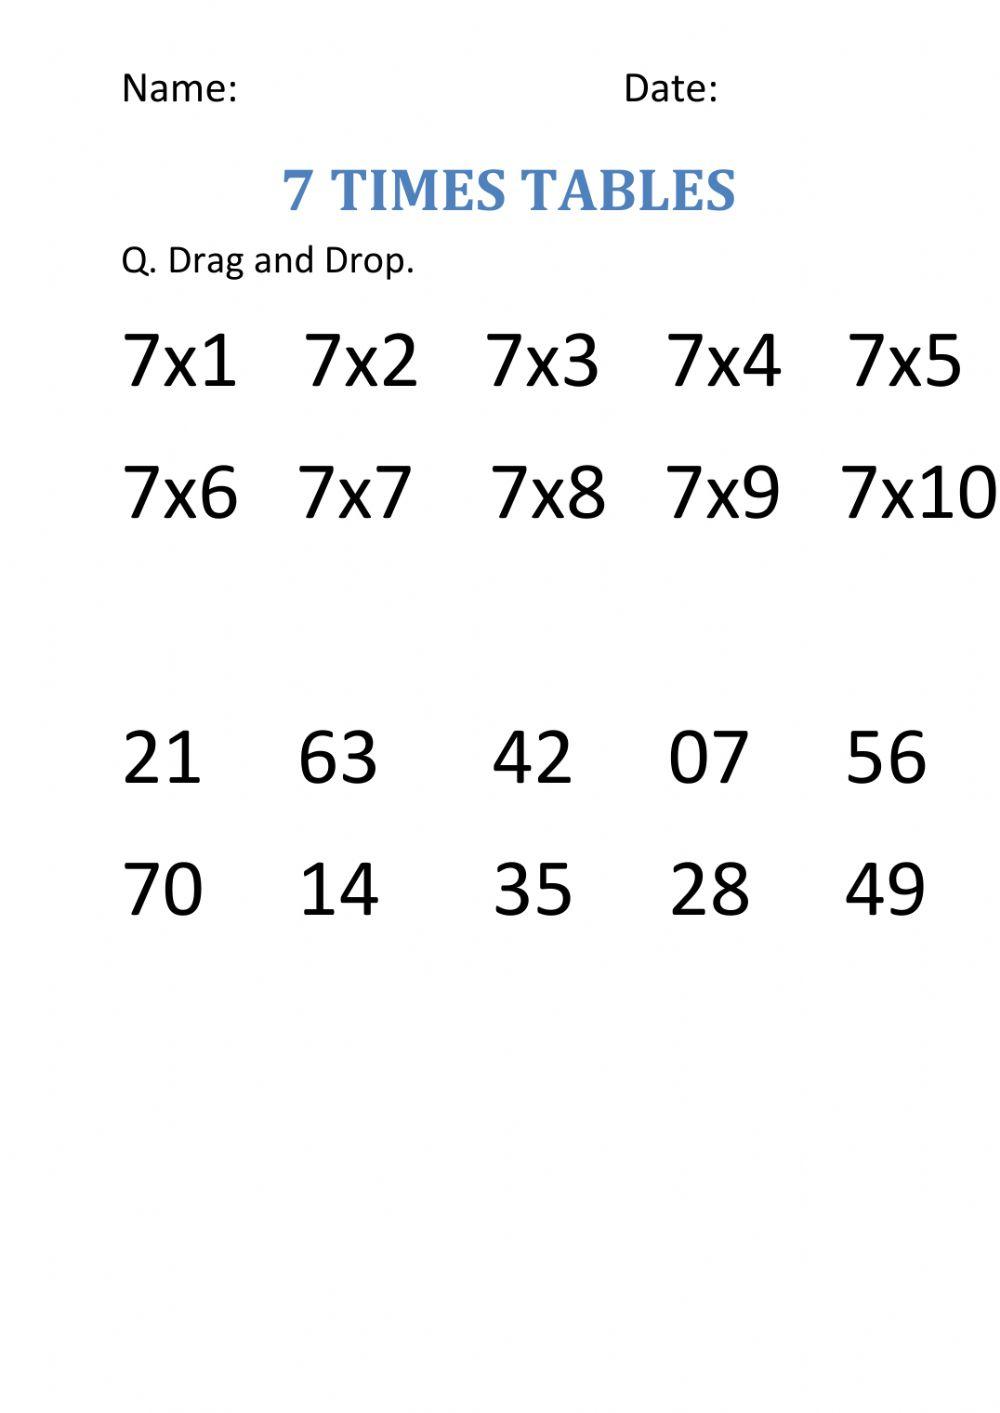 Times tables of 7